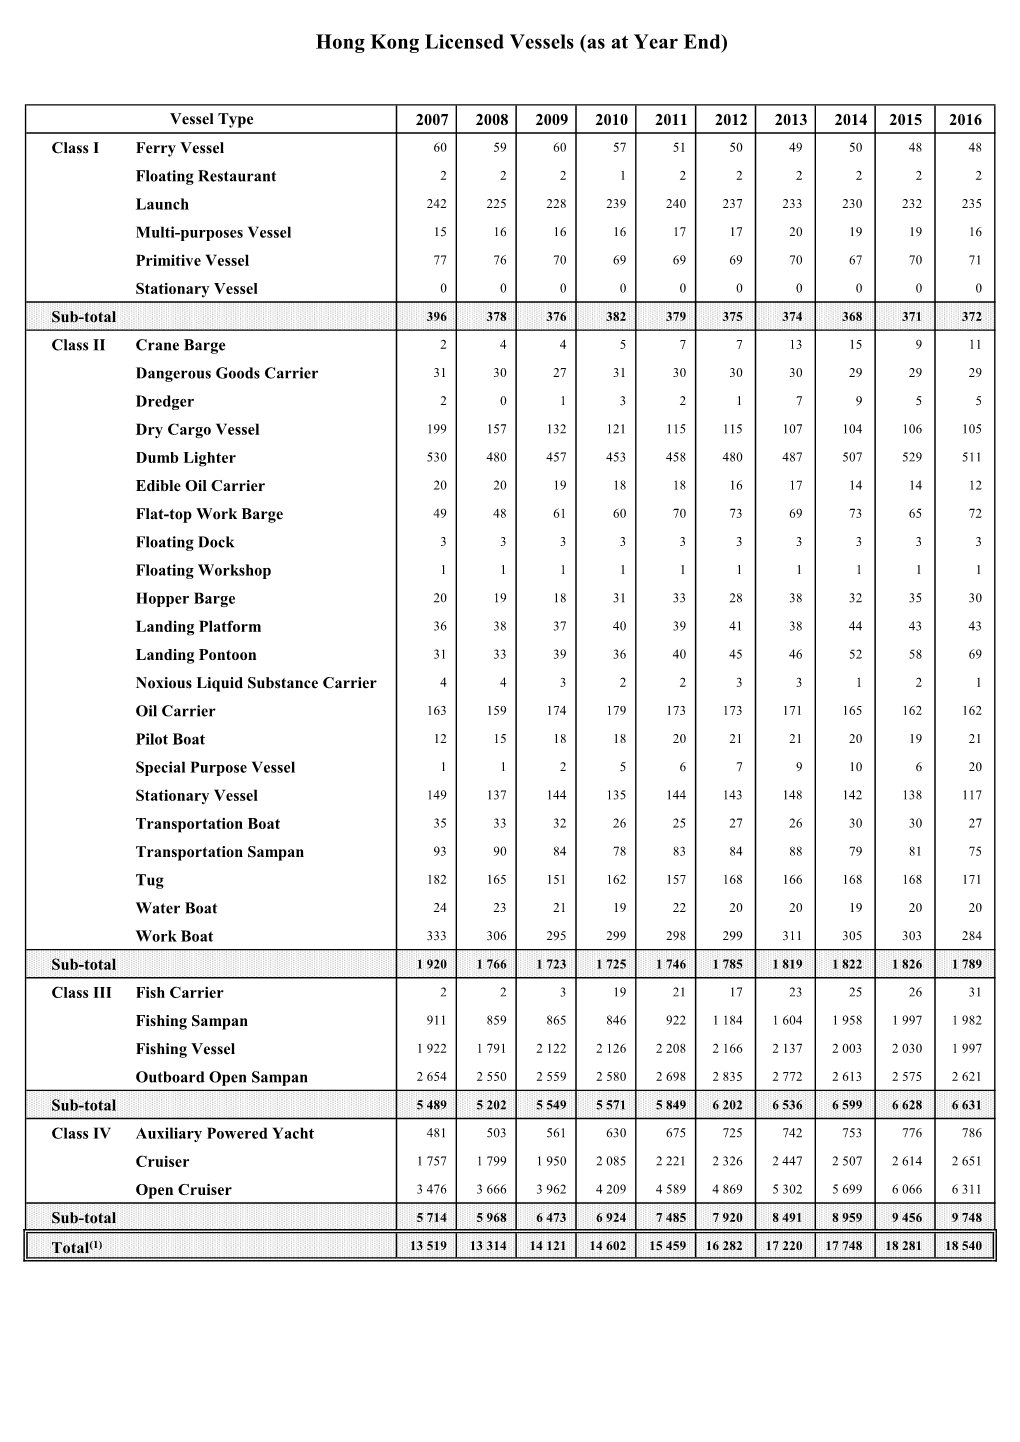 Statistics on Hong Kong Licensed Vessels (With Valid Licence) (Old Series Prior to 2 January 2007)